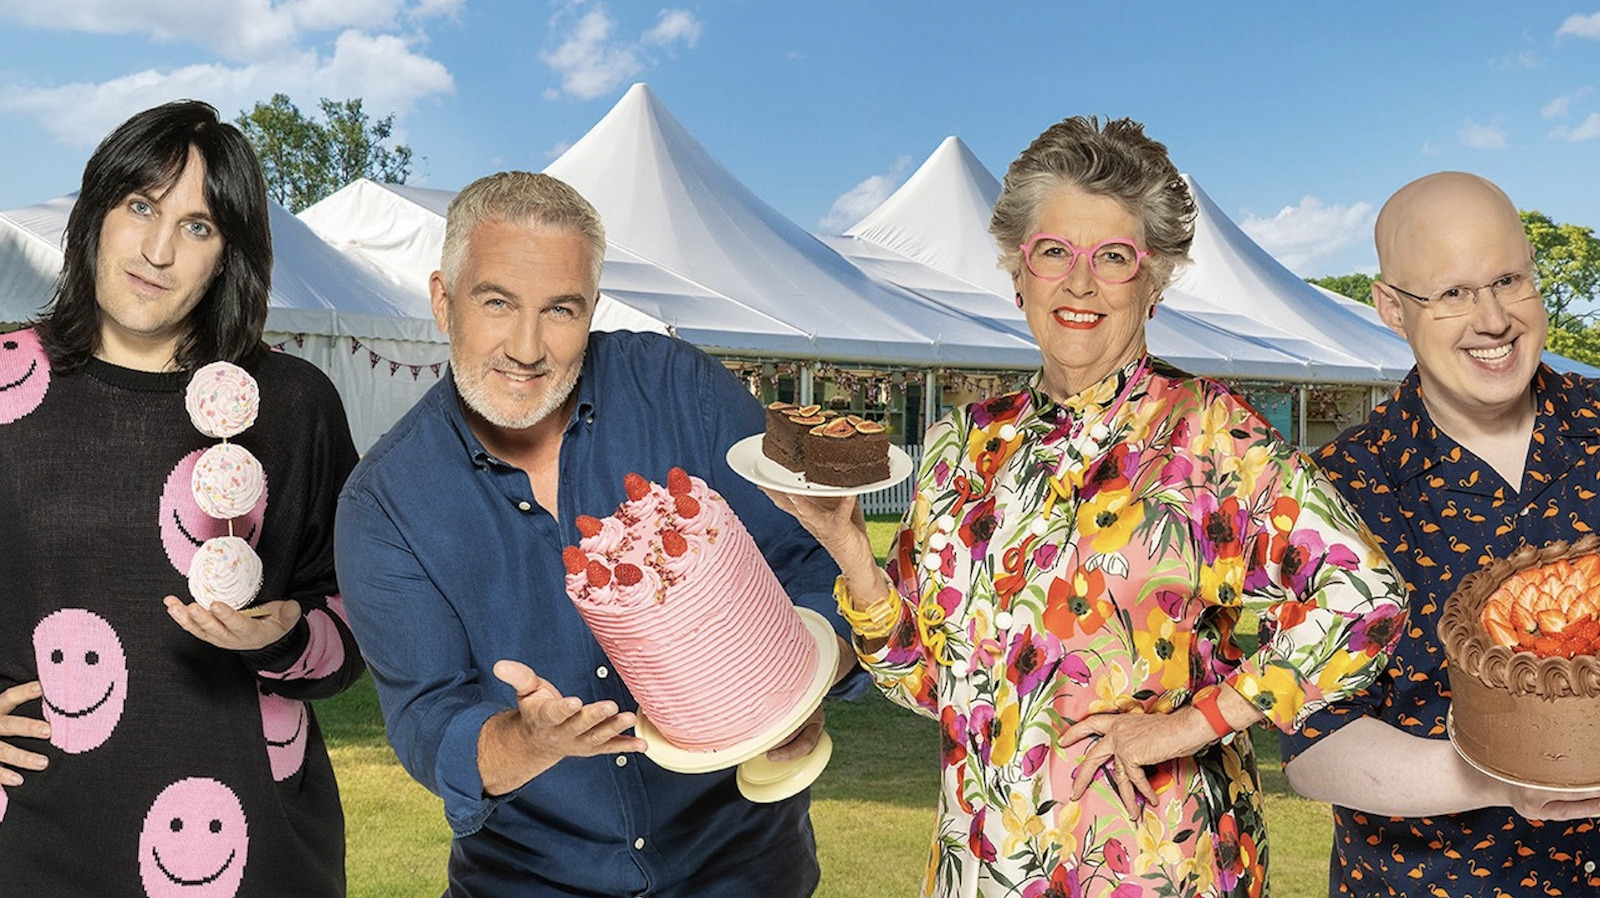 GBBO Season 13 Release Date, Contestants, And More What We Know So Far